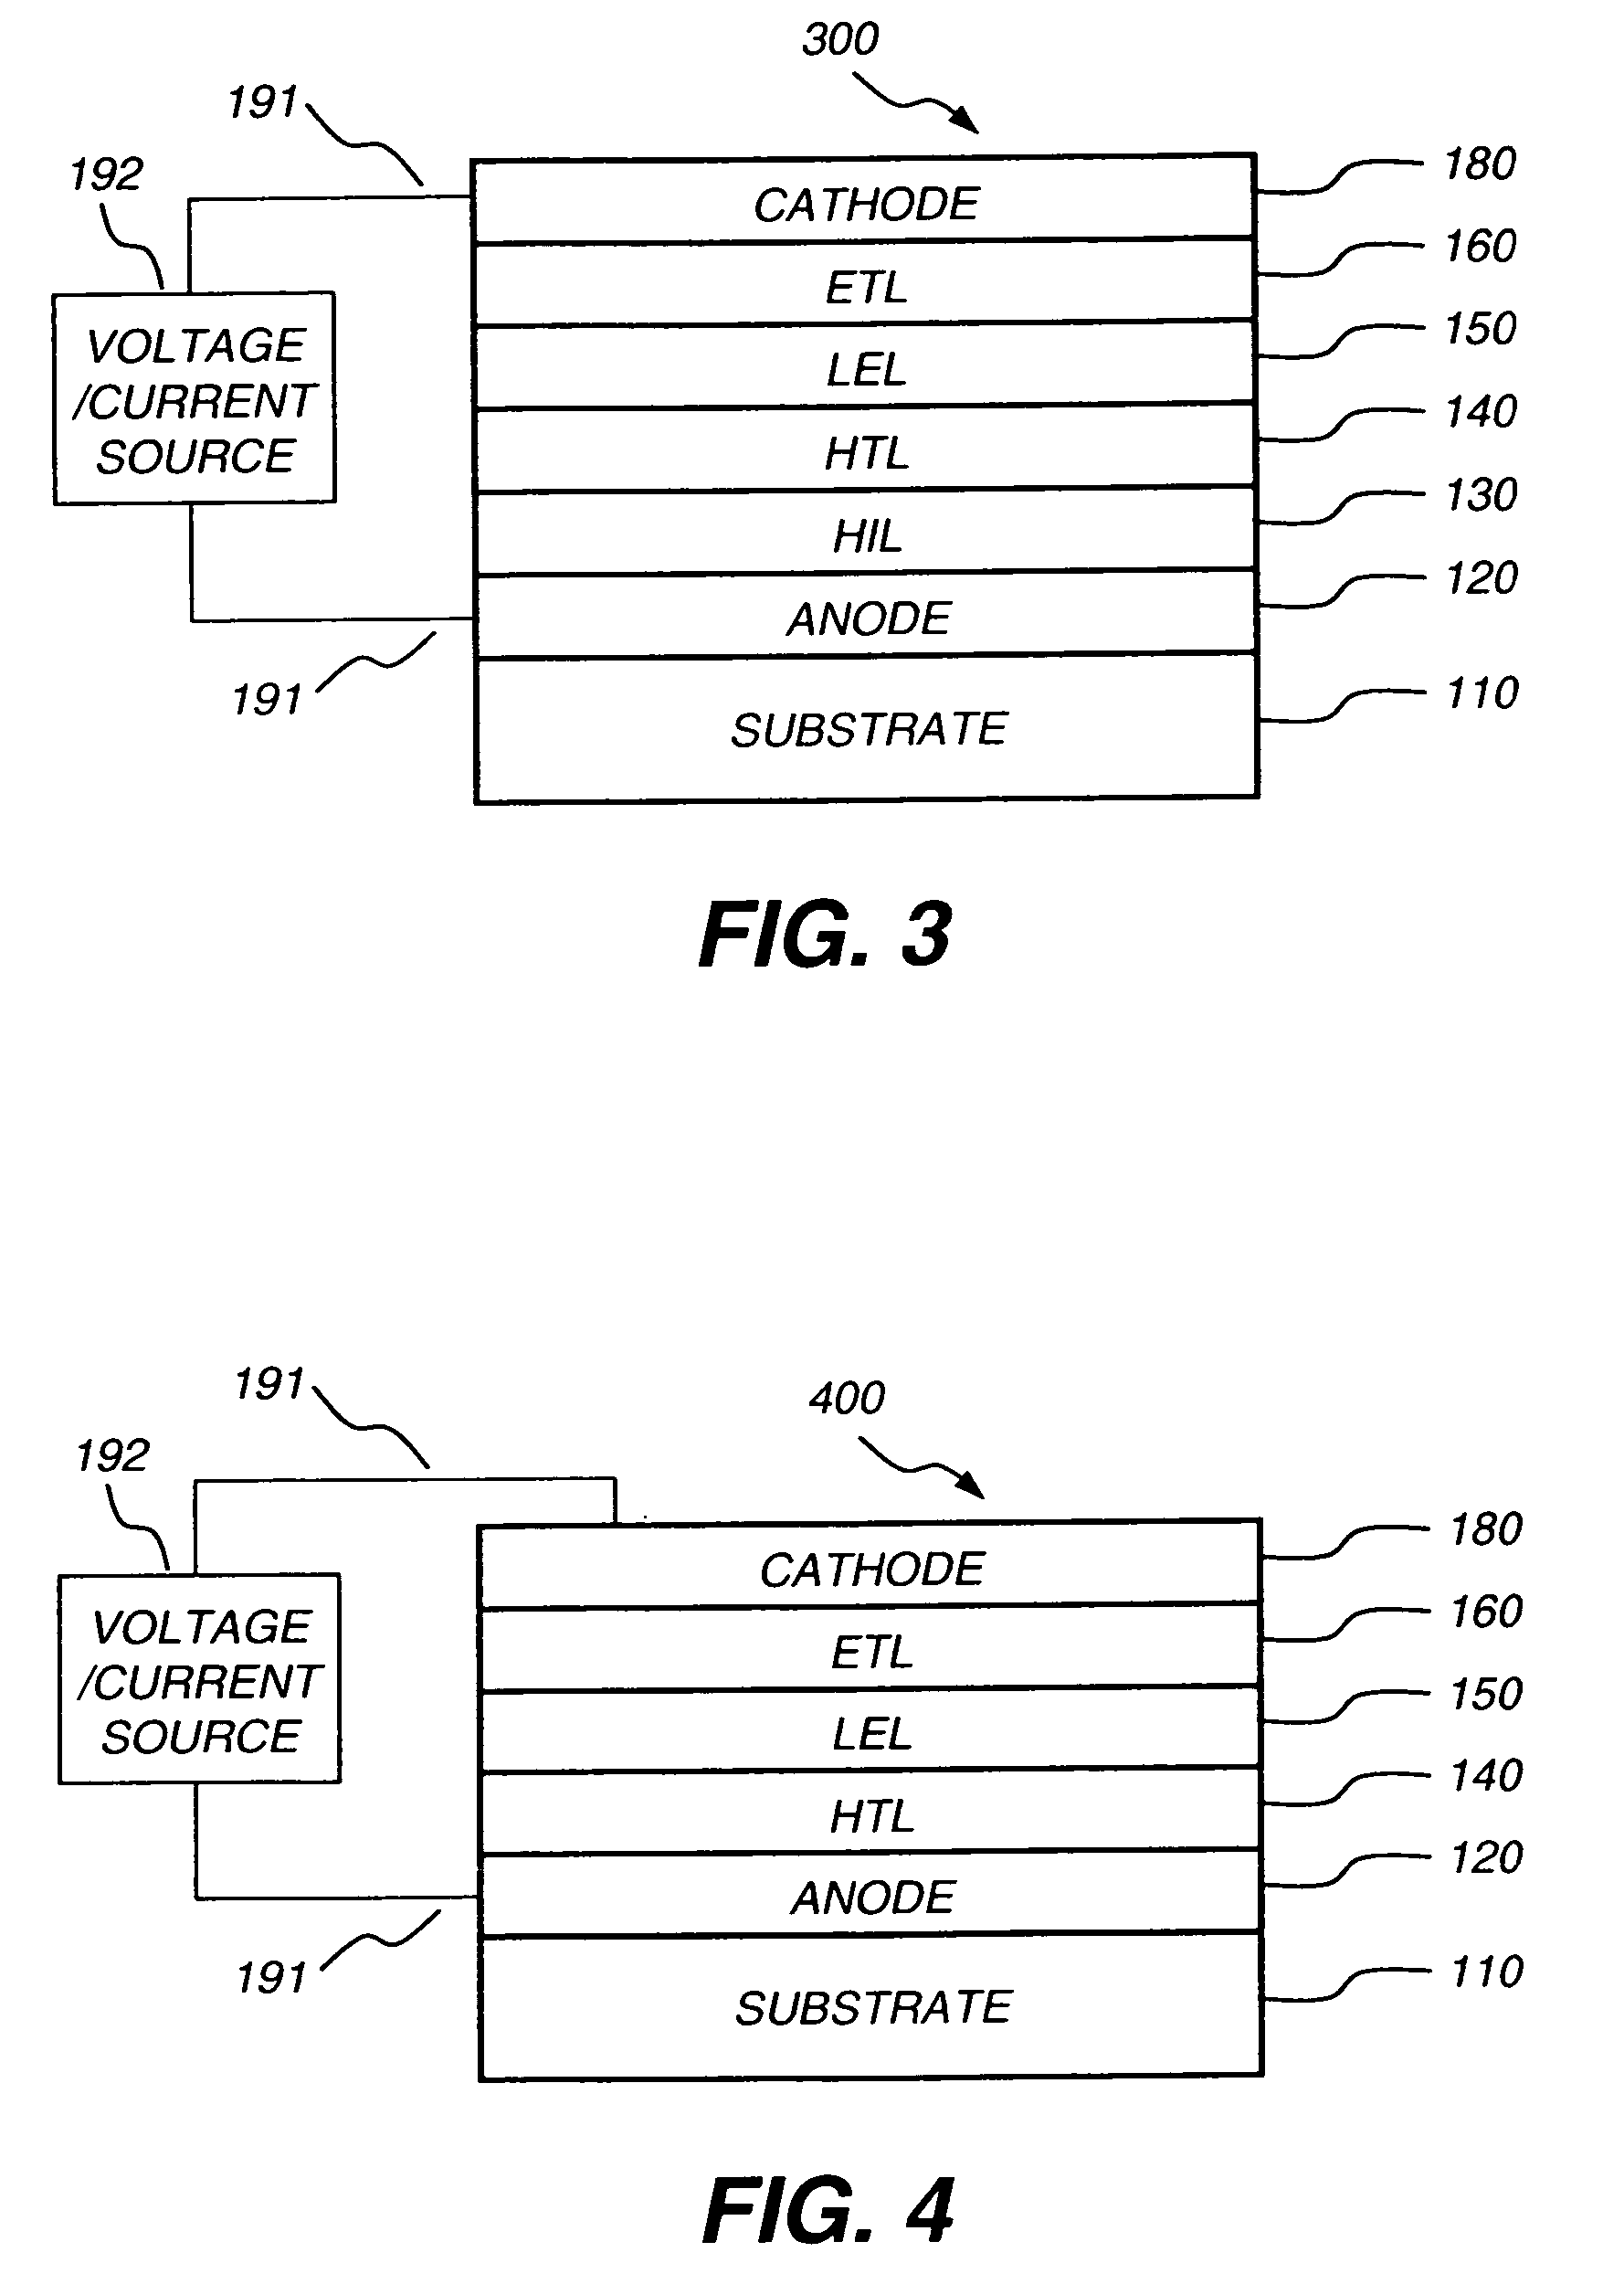 OLED electron-transporting layer